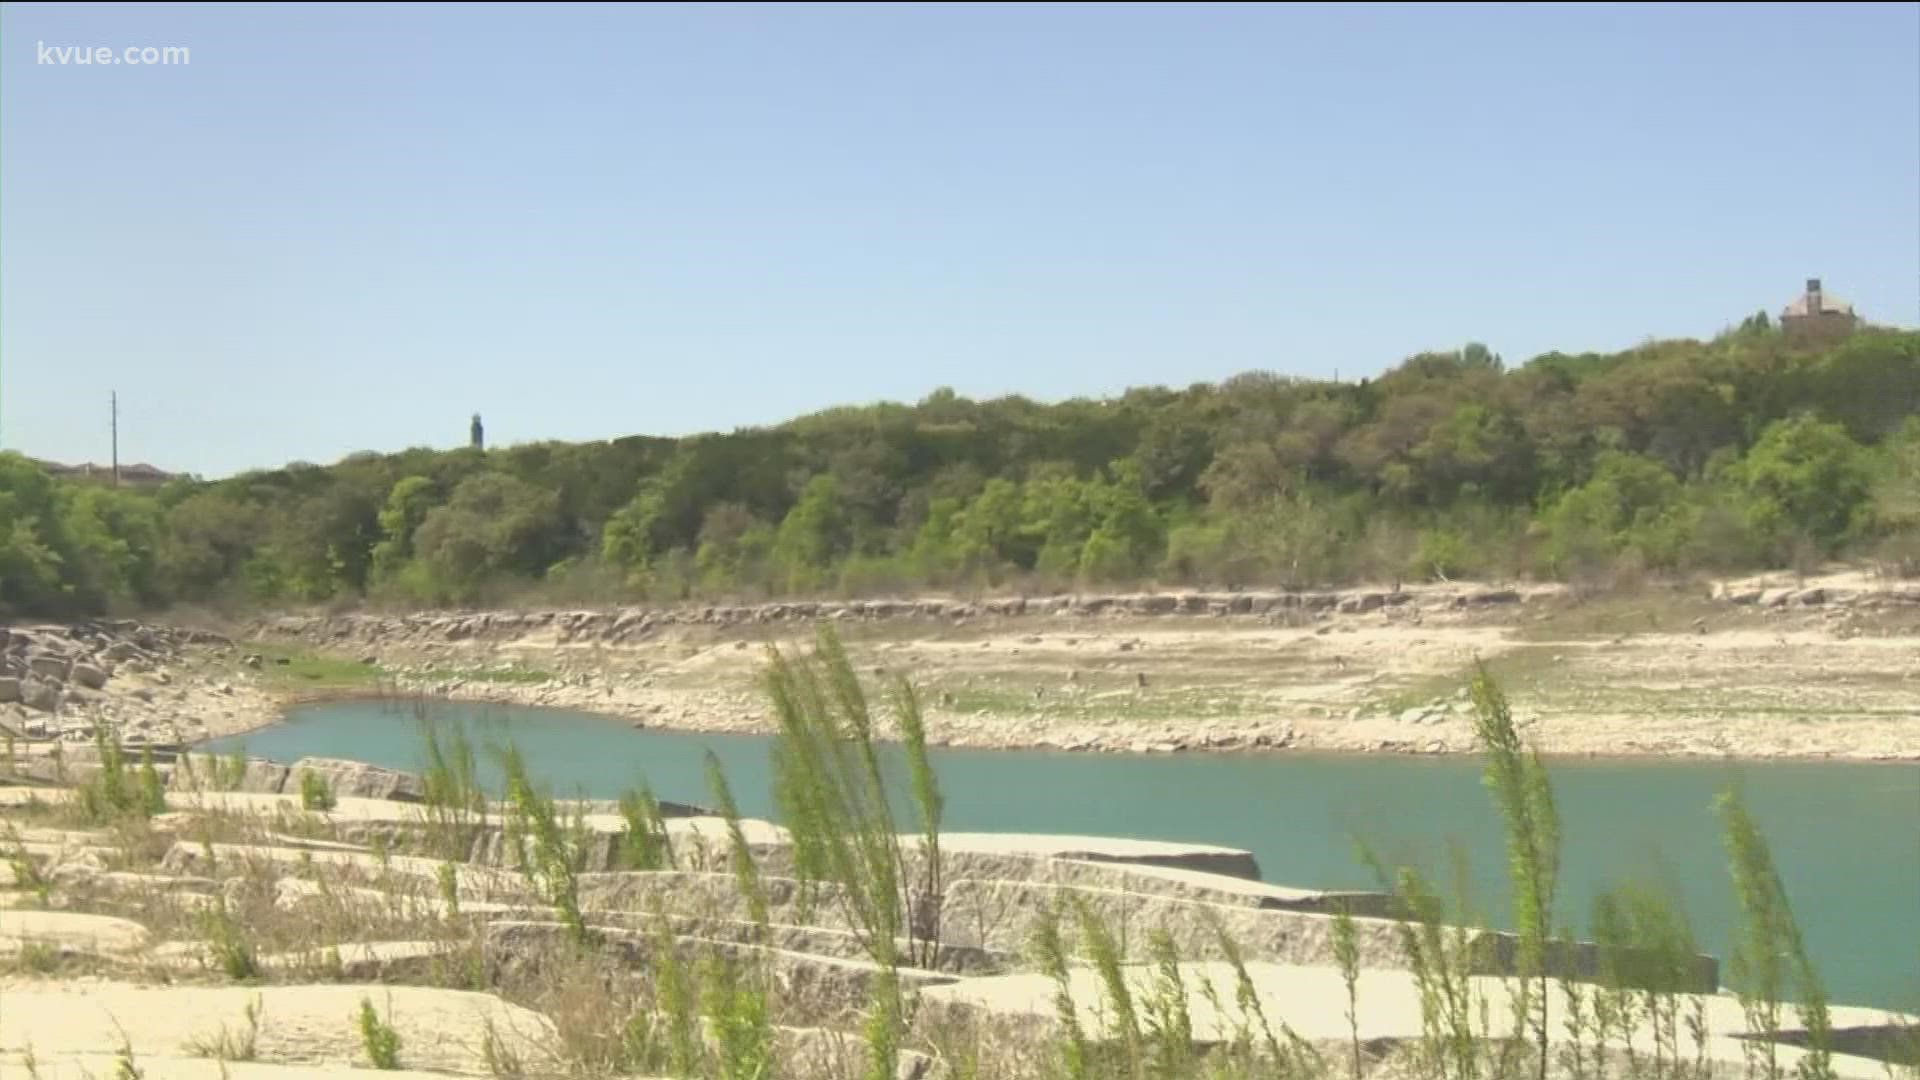 Hot and dry conditions increase, lake levels decrease. Lake Travis is currently 68% full.